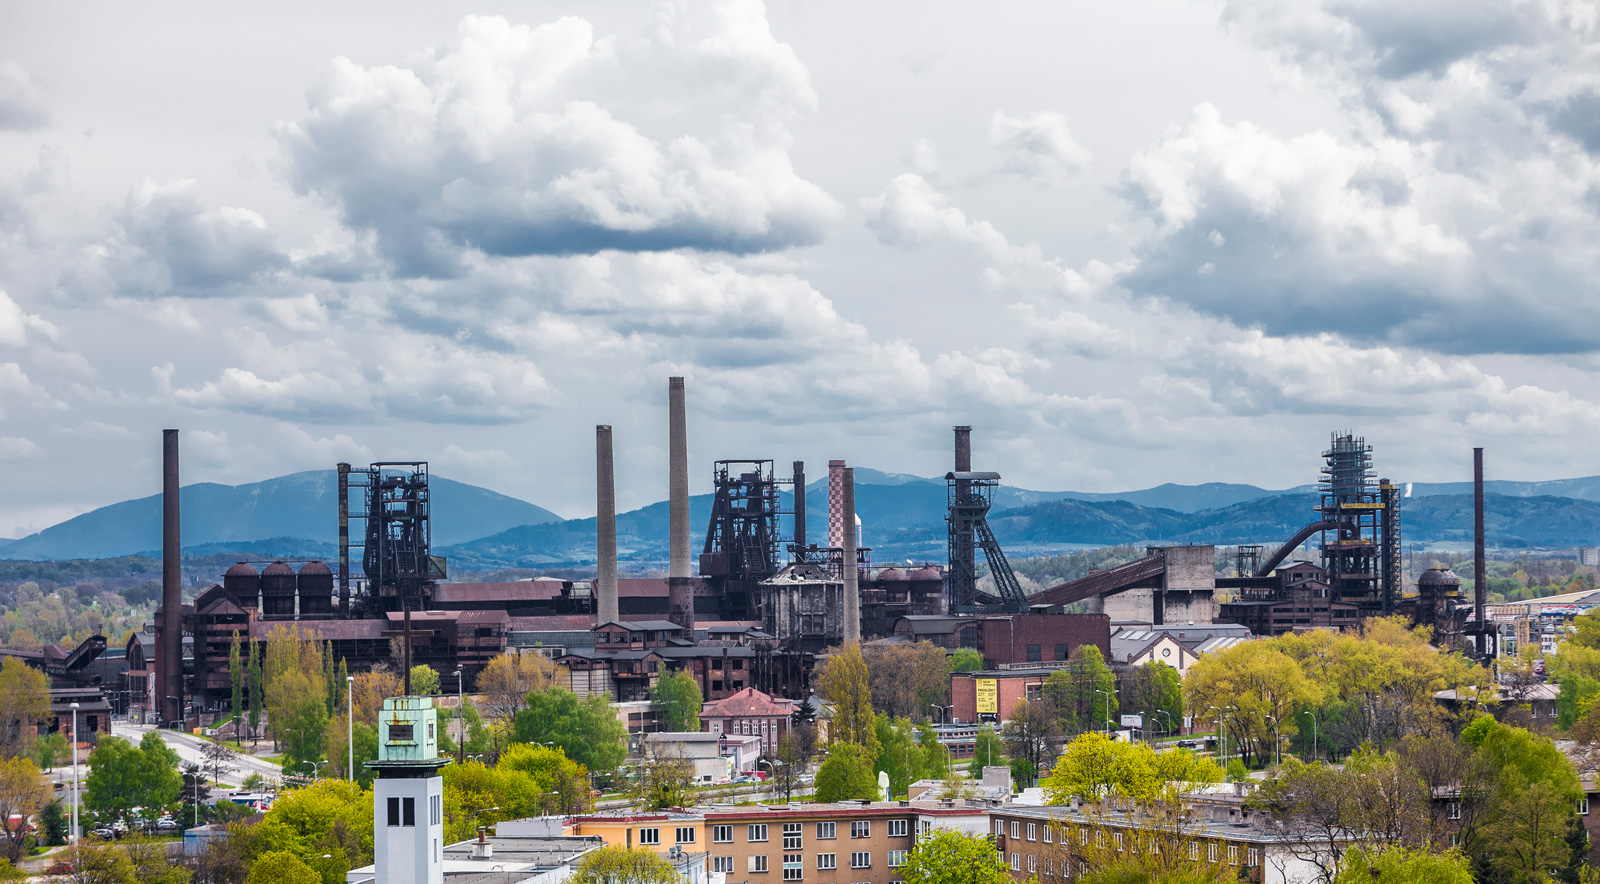 The Colours of Ostrava Festival industrial site